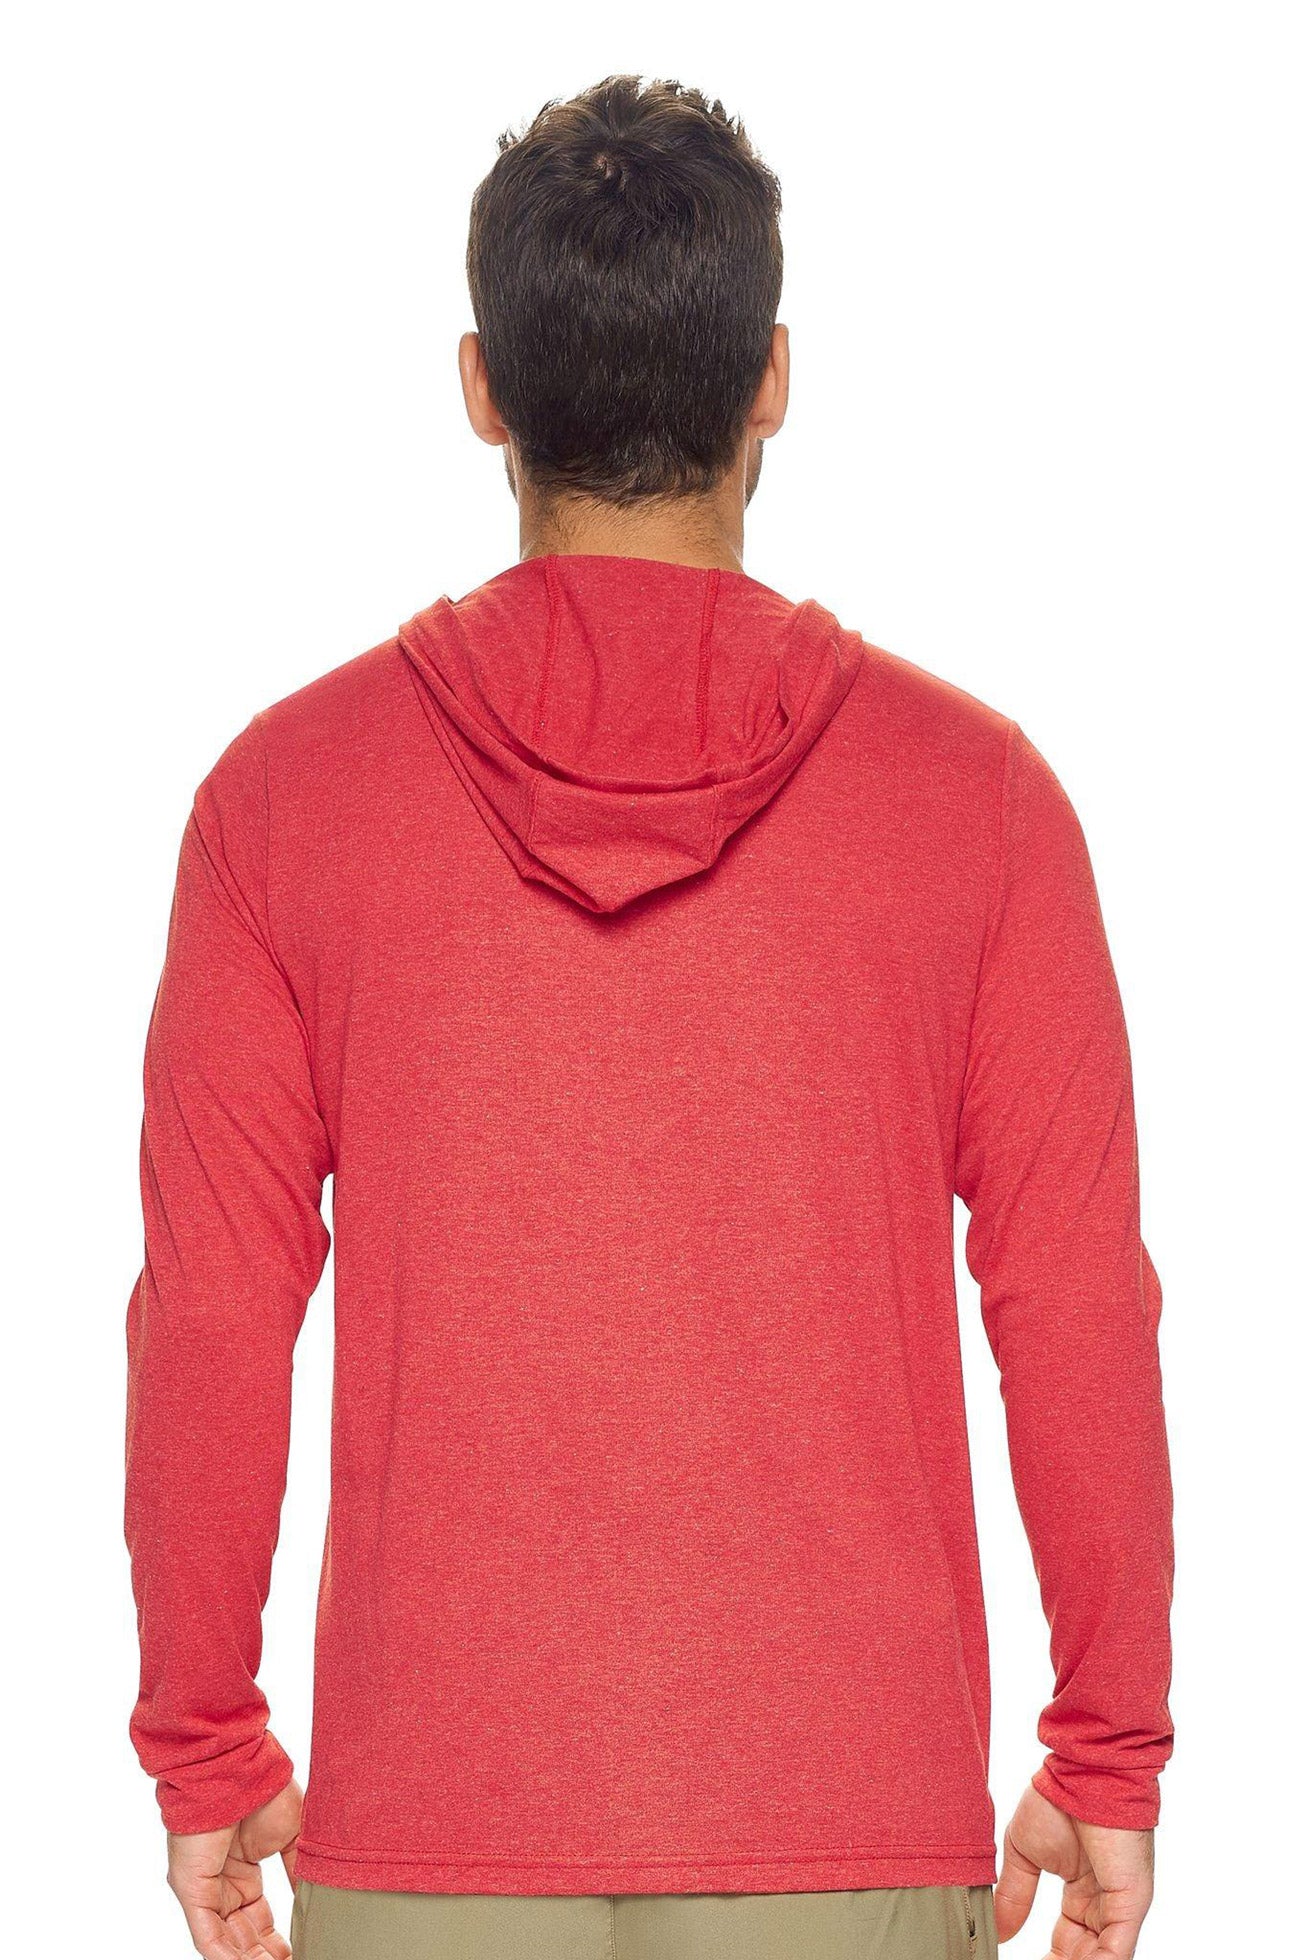 Expert Apparel Men's Hoodie Shirt Performance Dark Heather Red Made in USA Image 3#color_dark-heather-red